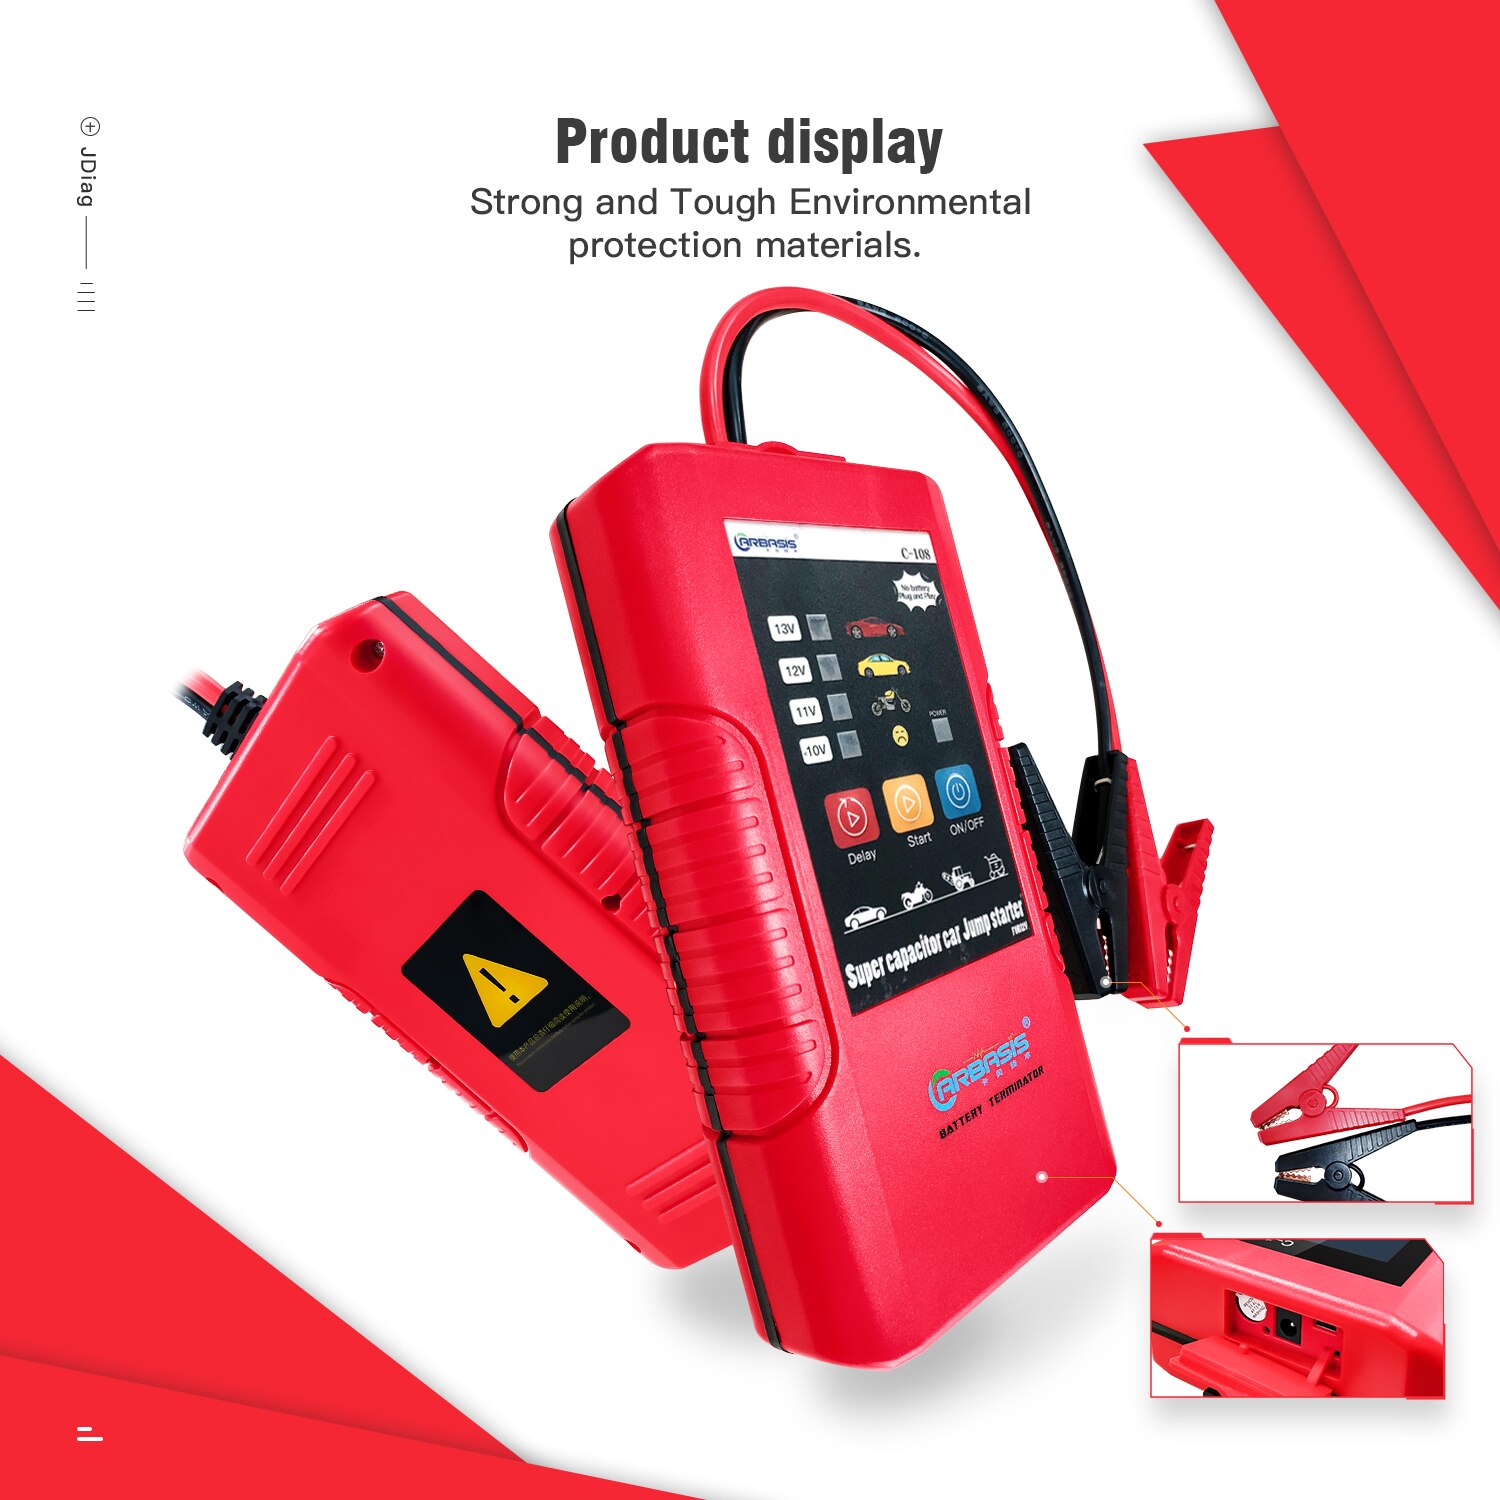 12V SUPER CAPACITOR JUMP STARTER Car Accessories Power Bank Automobile Starting Power Supply without LCD Display